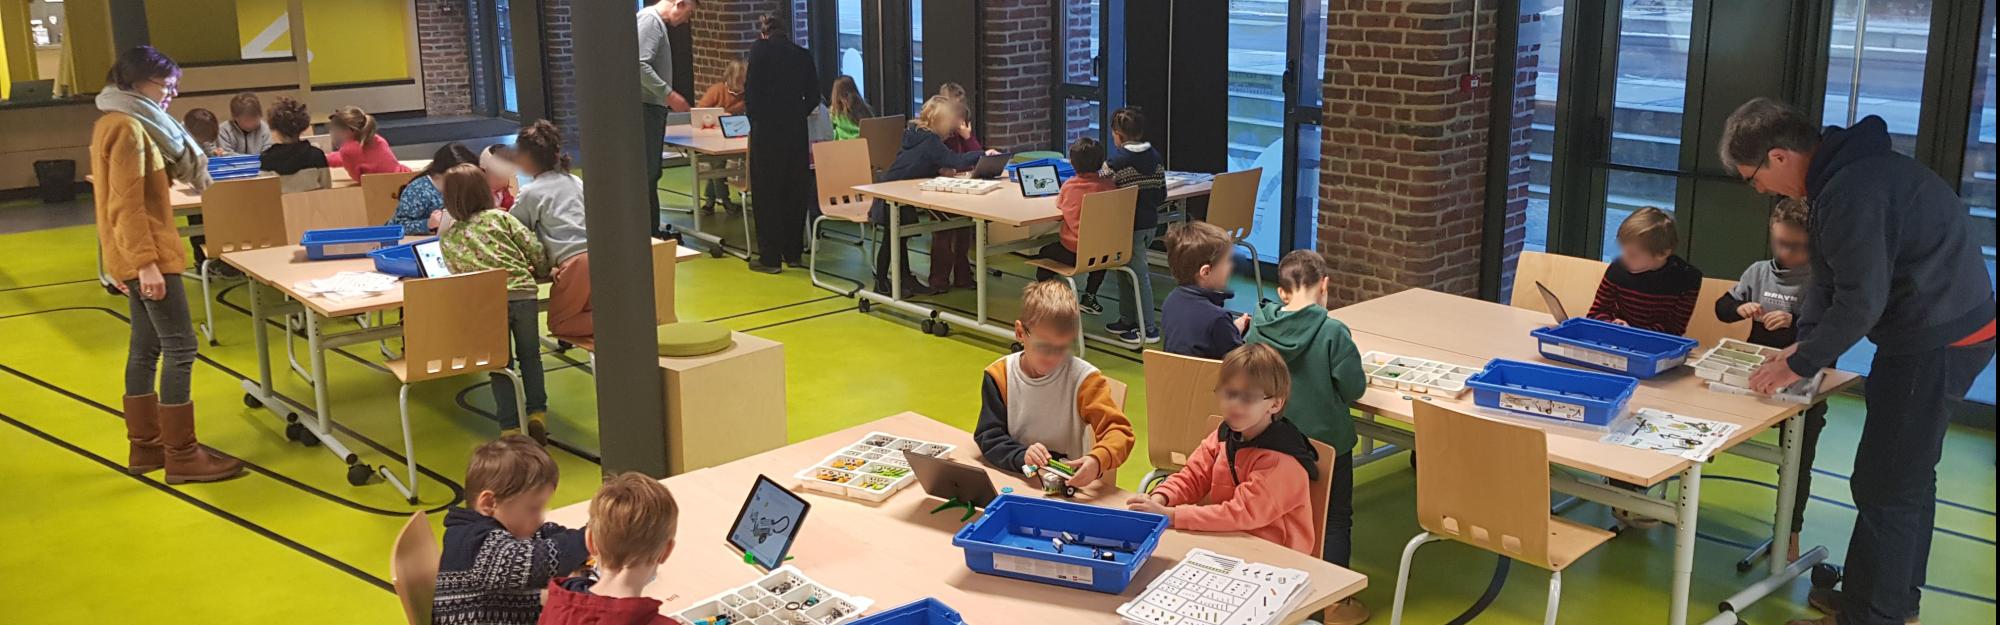 EuraTech&#039;Kids: Cultivating a passion for digital technology from an early age